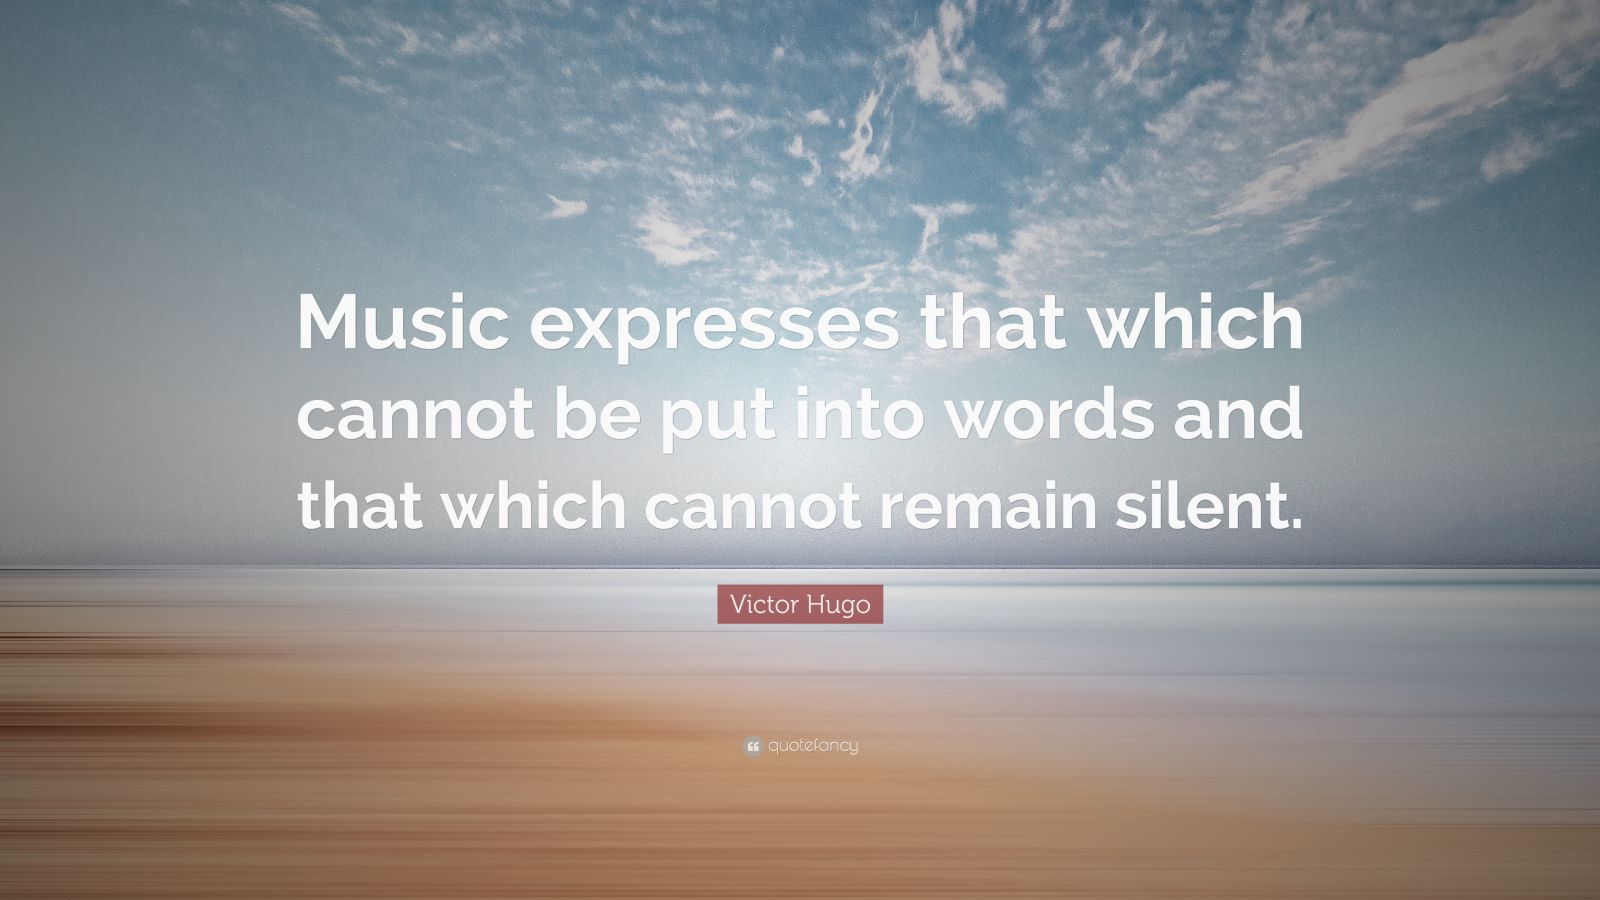 music expresses that which cannot be put into words and that